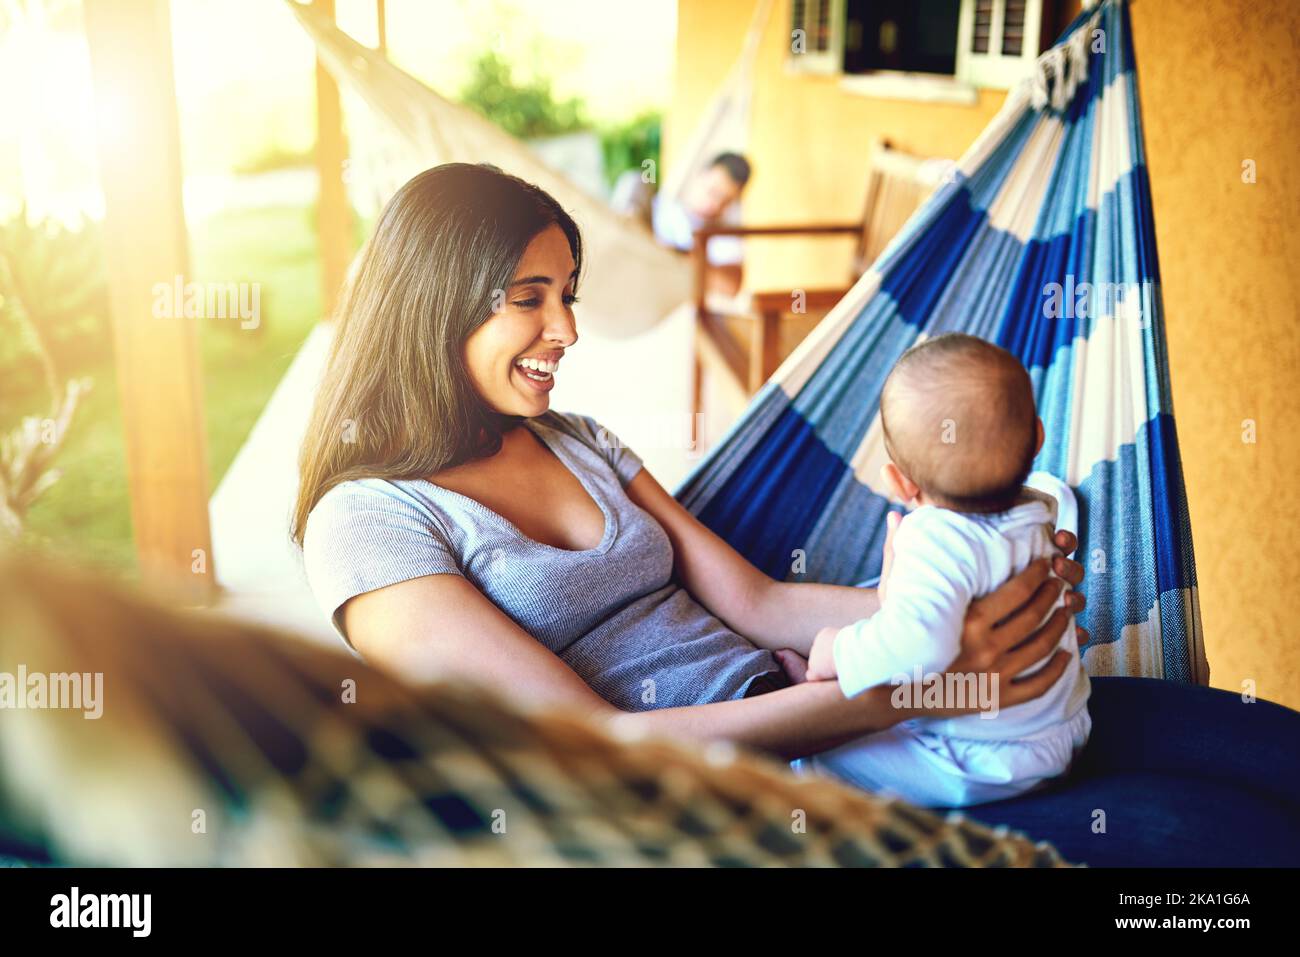 Bonding with the newborn. a cheerful young mother holding her baby infant son while smiling at him outside at home. Stock Photo